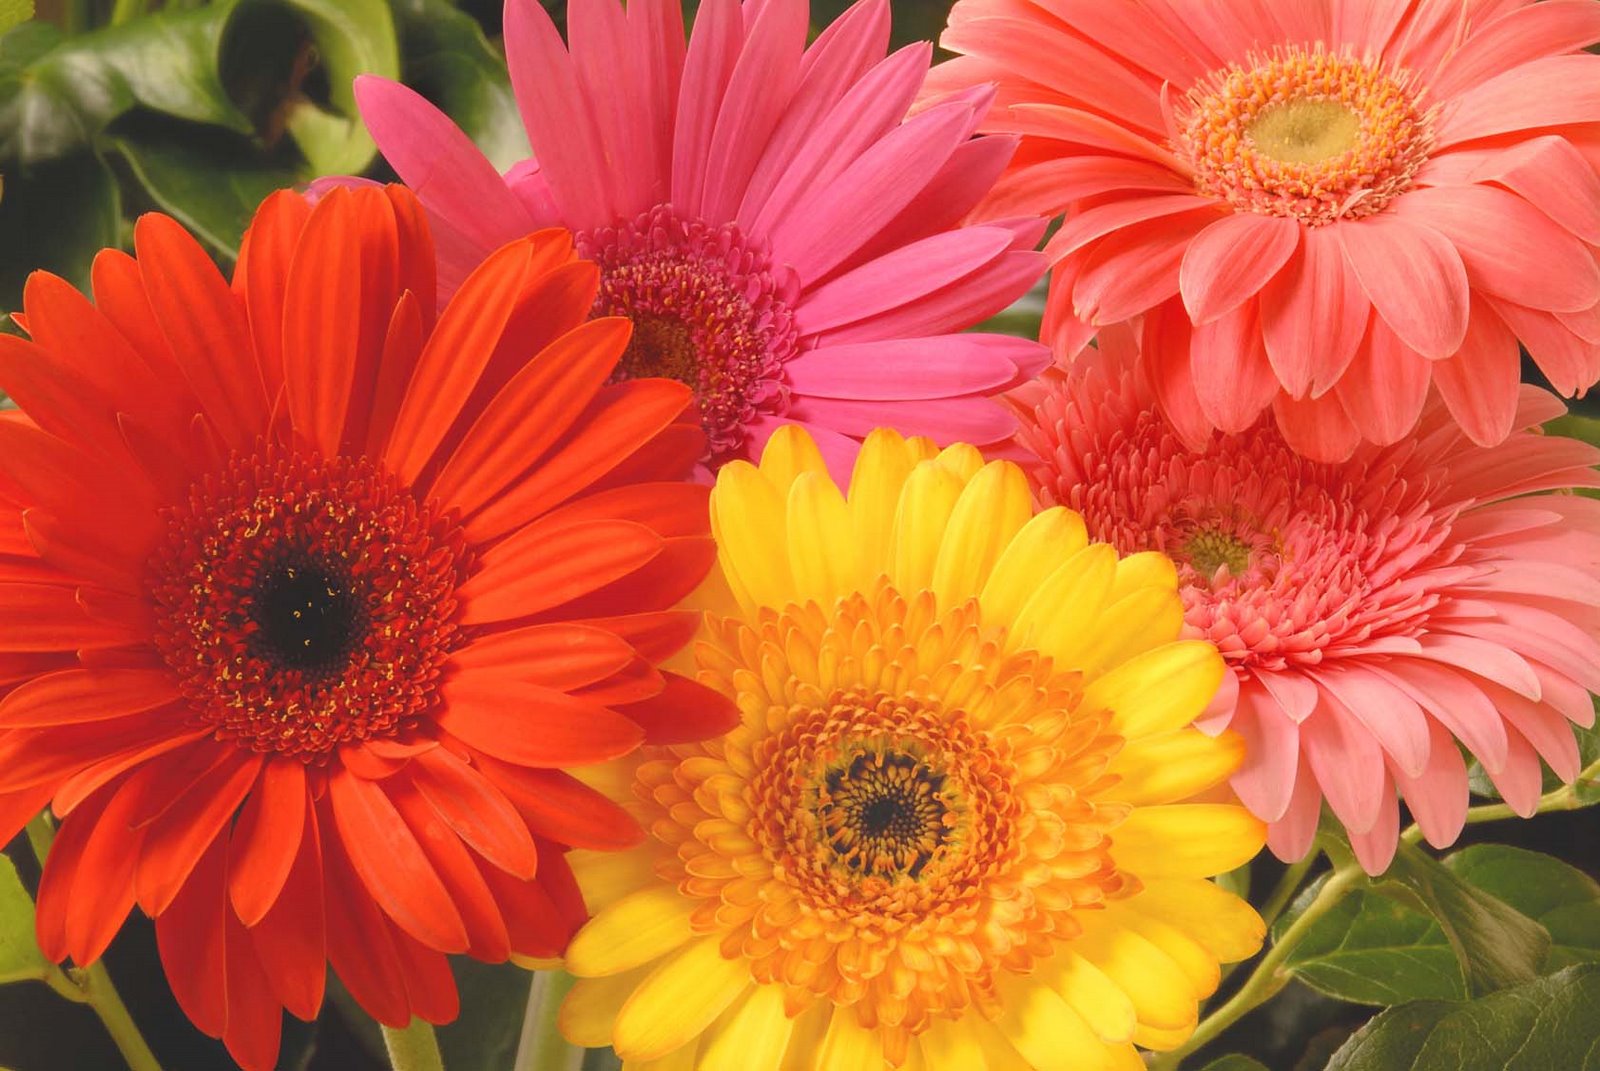 The flower heads can be a small as 7cm known as the mini gerbera or 1600x1071